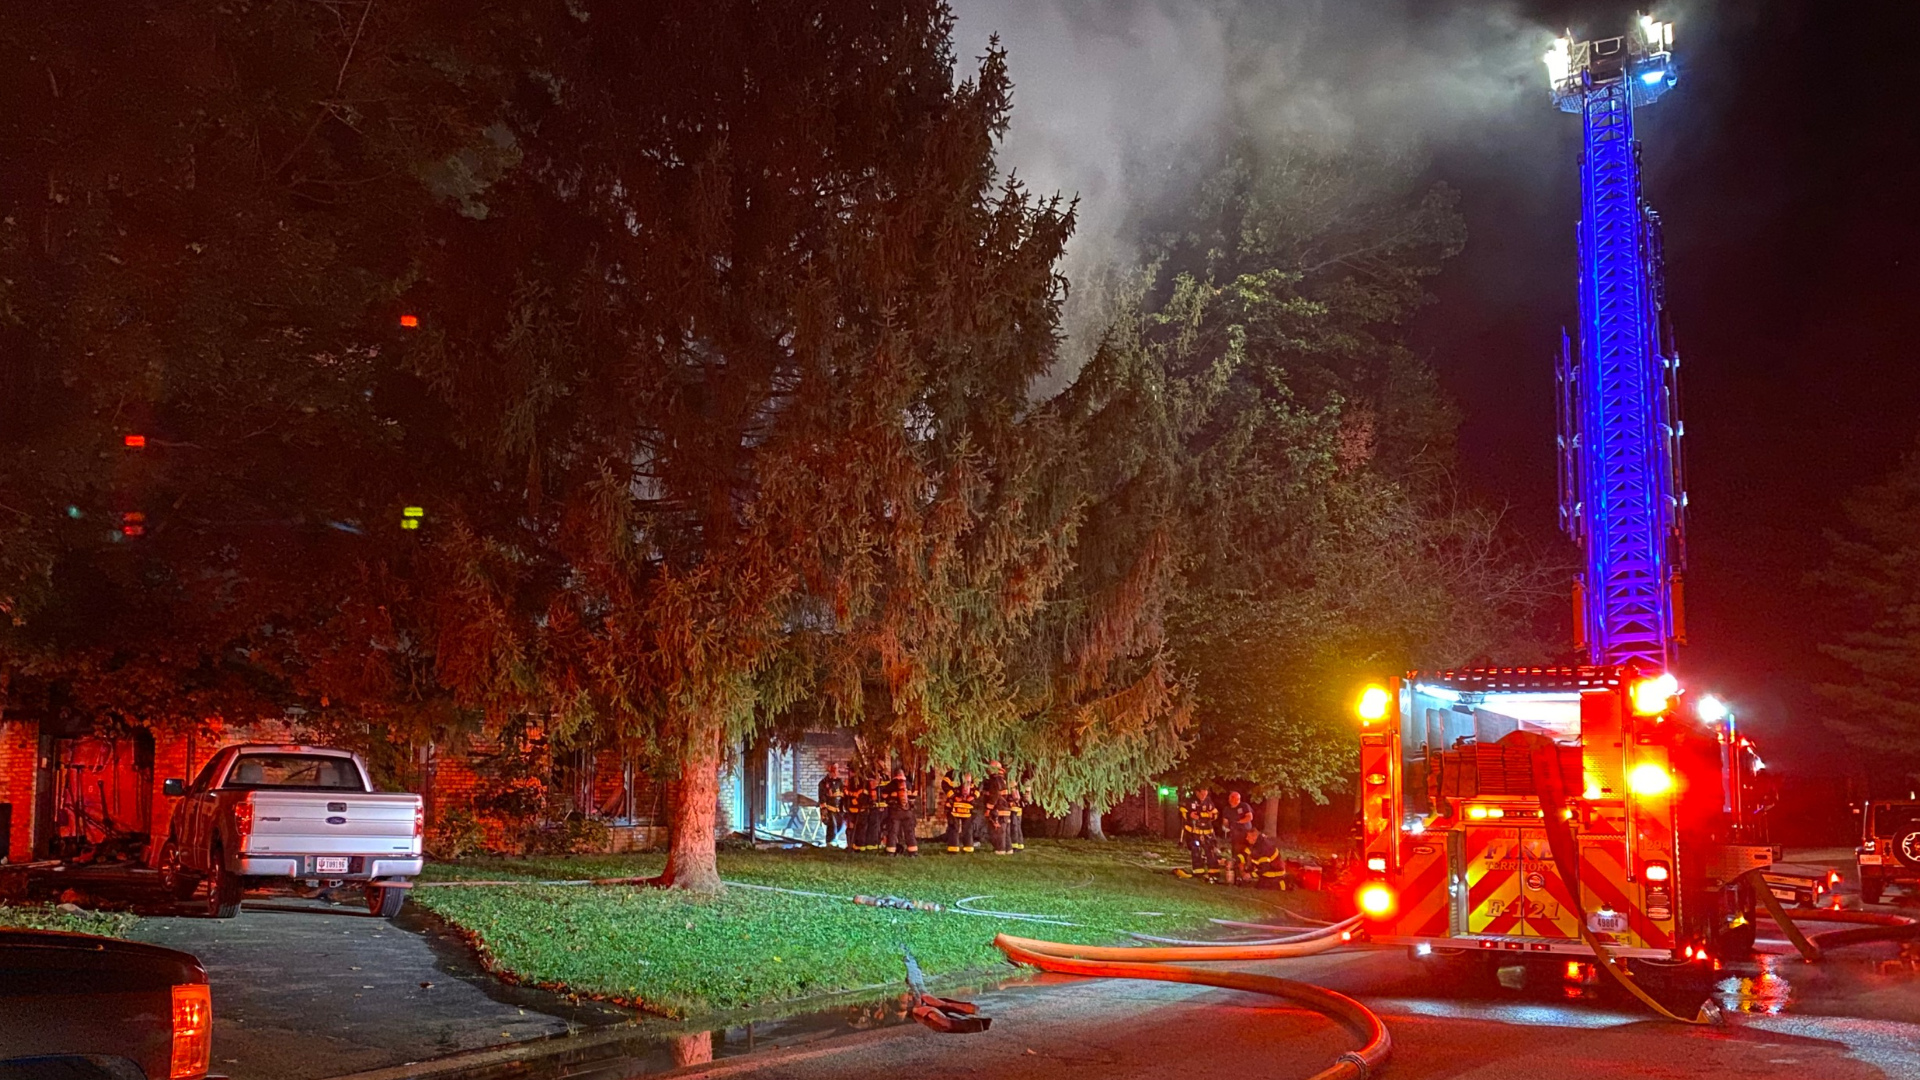 Firefighters told 13News a person was walking their dog shortly after 1:30 a.m. when they saw their neighbor's house on fire.